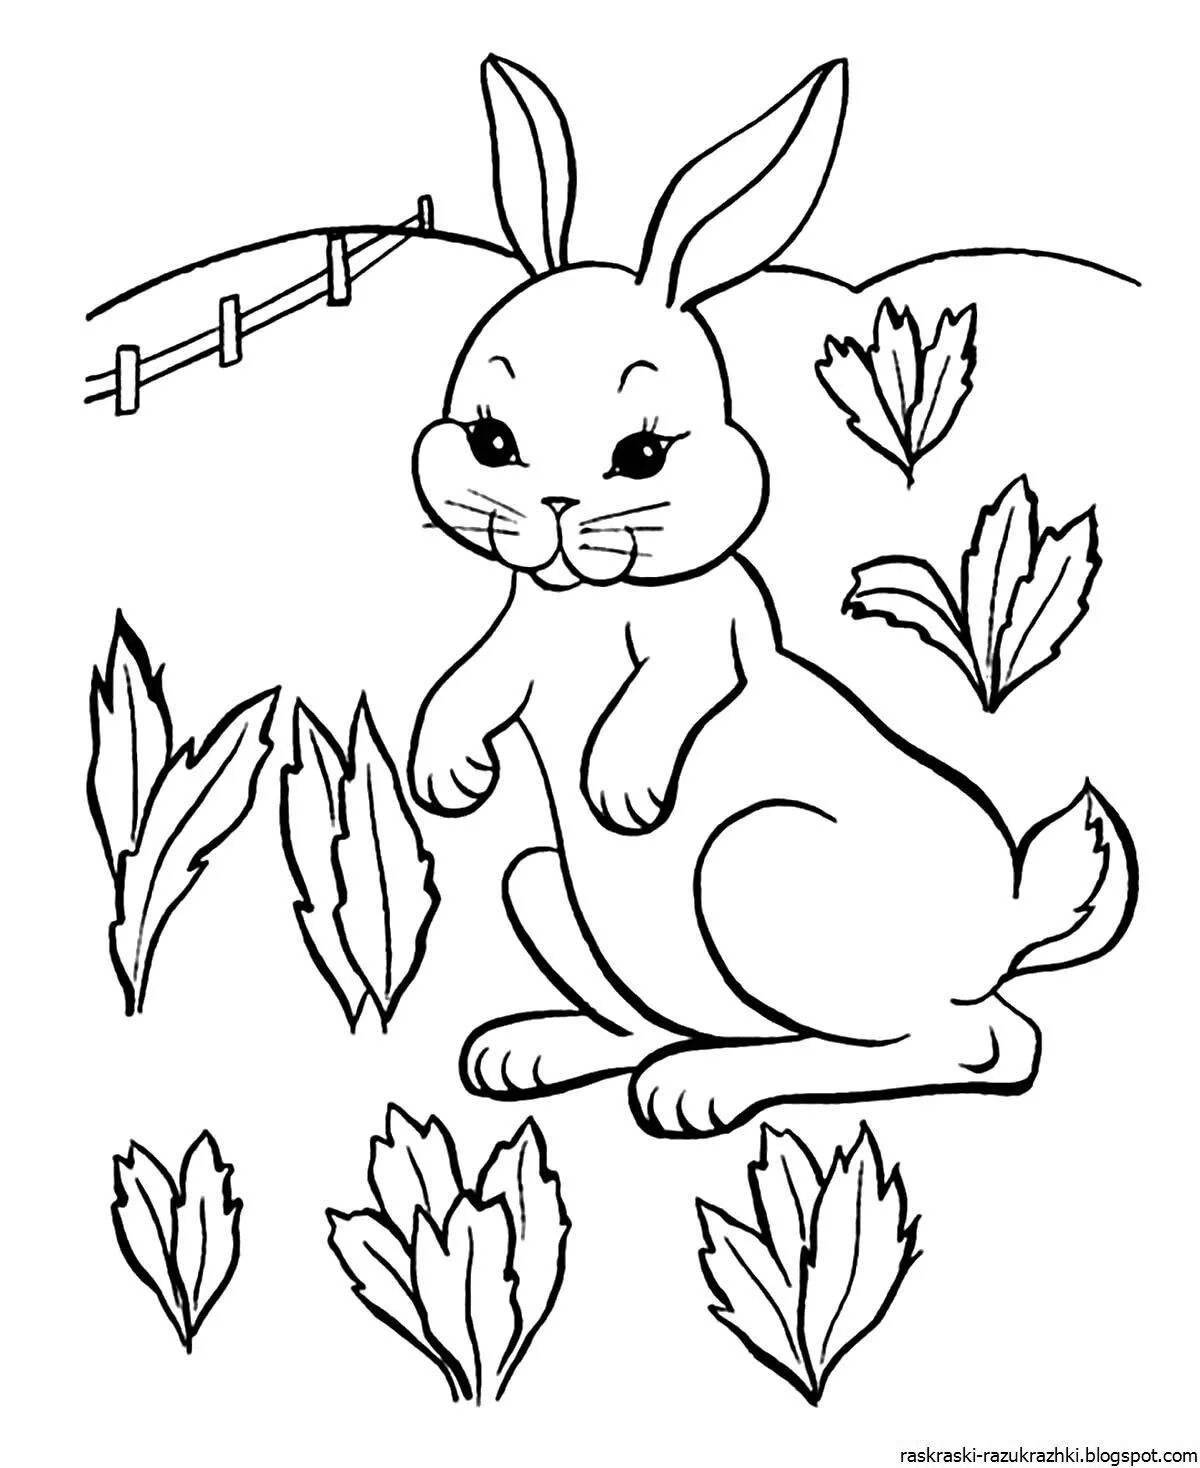 Swaying bunny coloring book